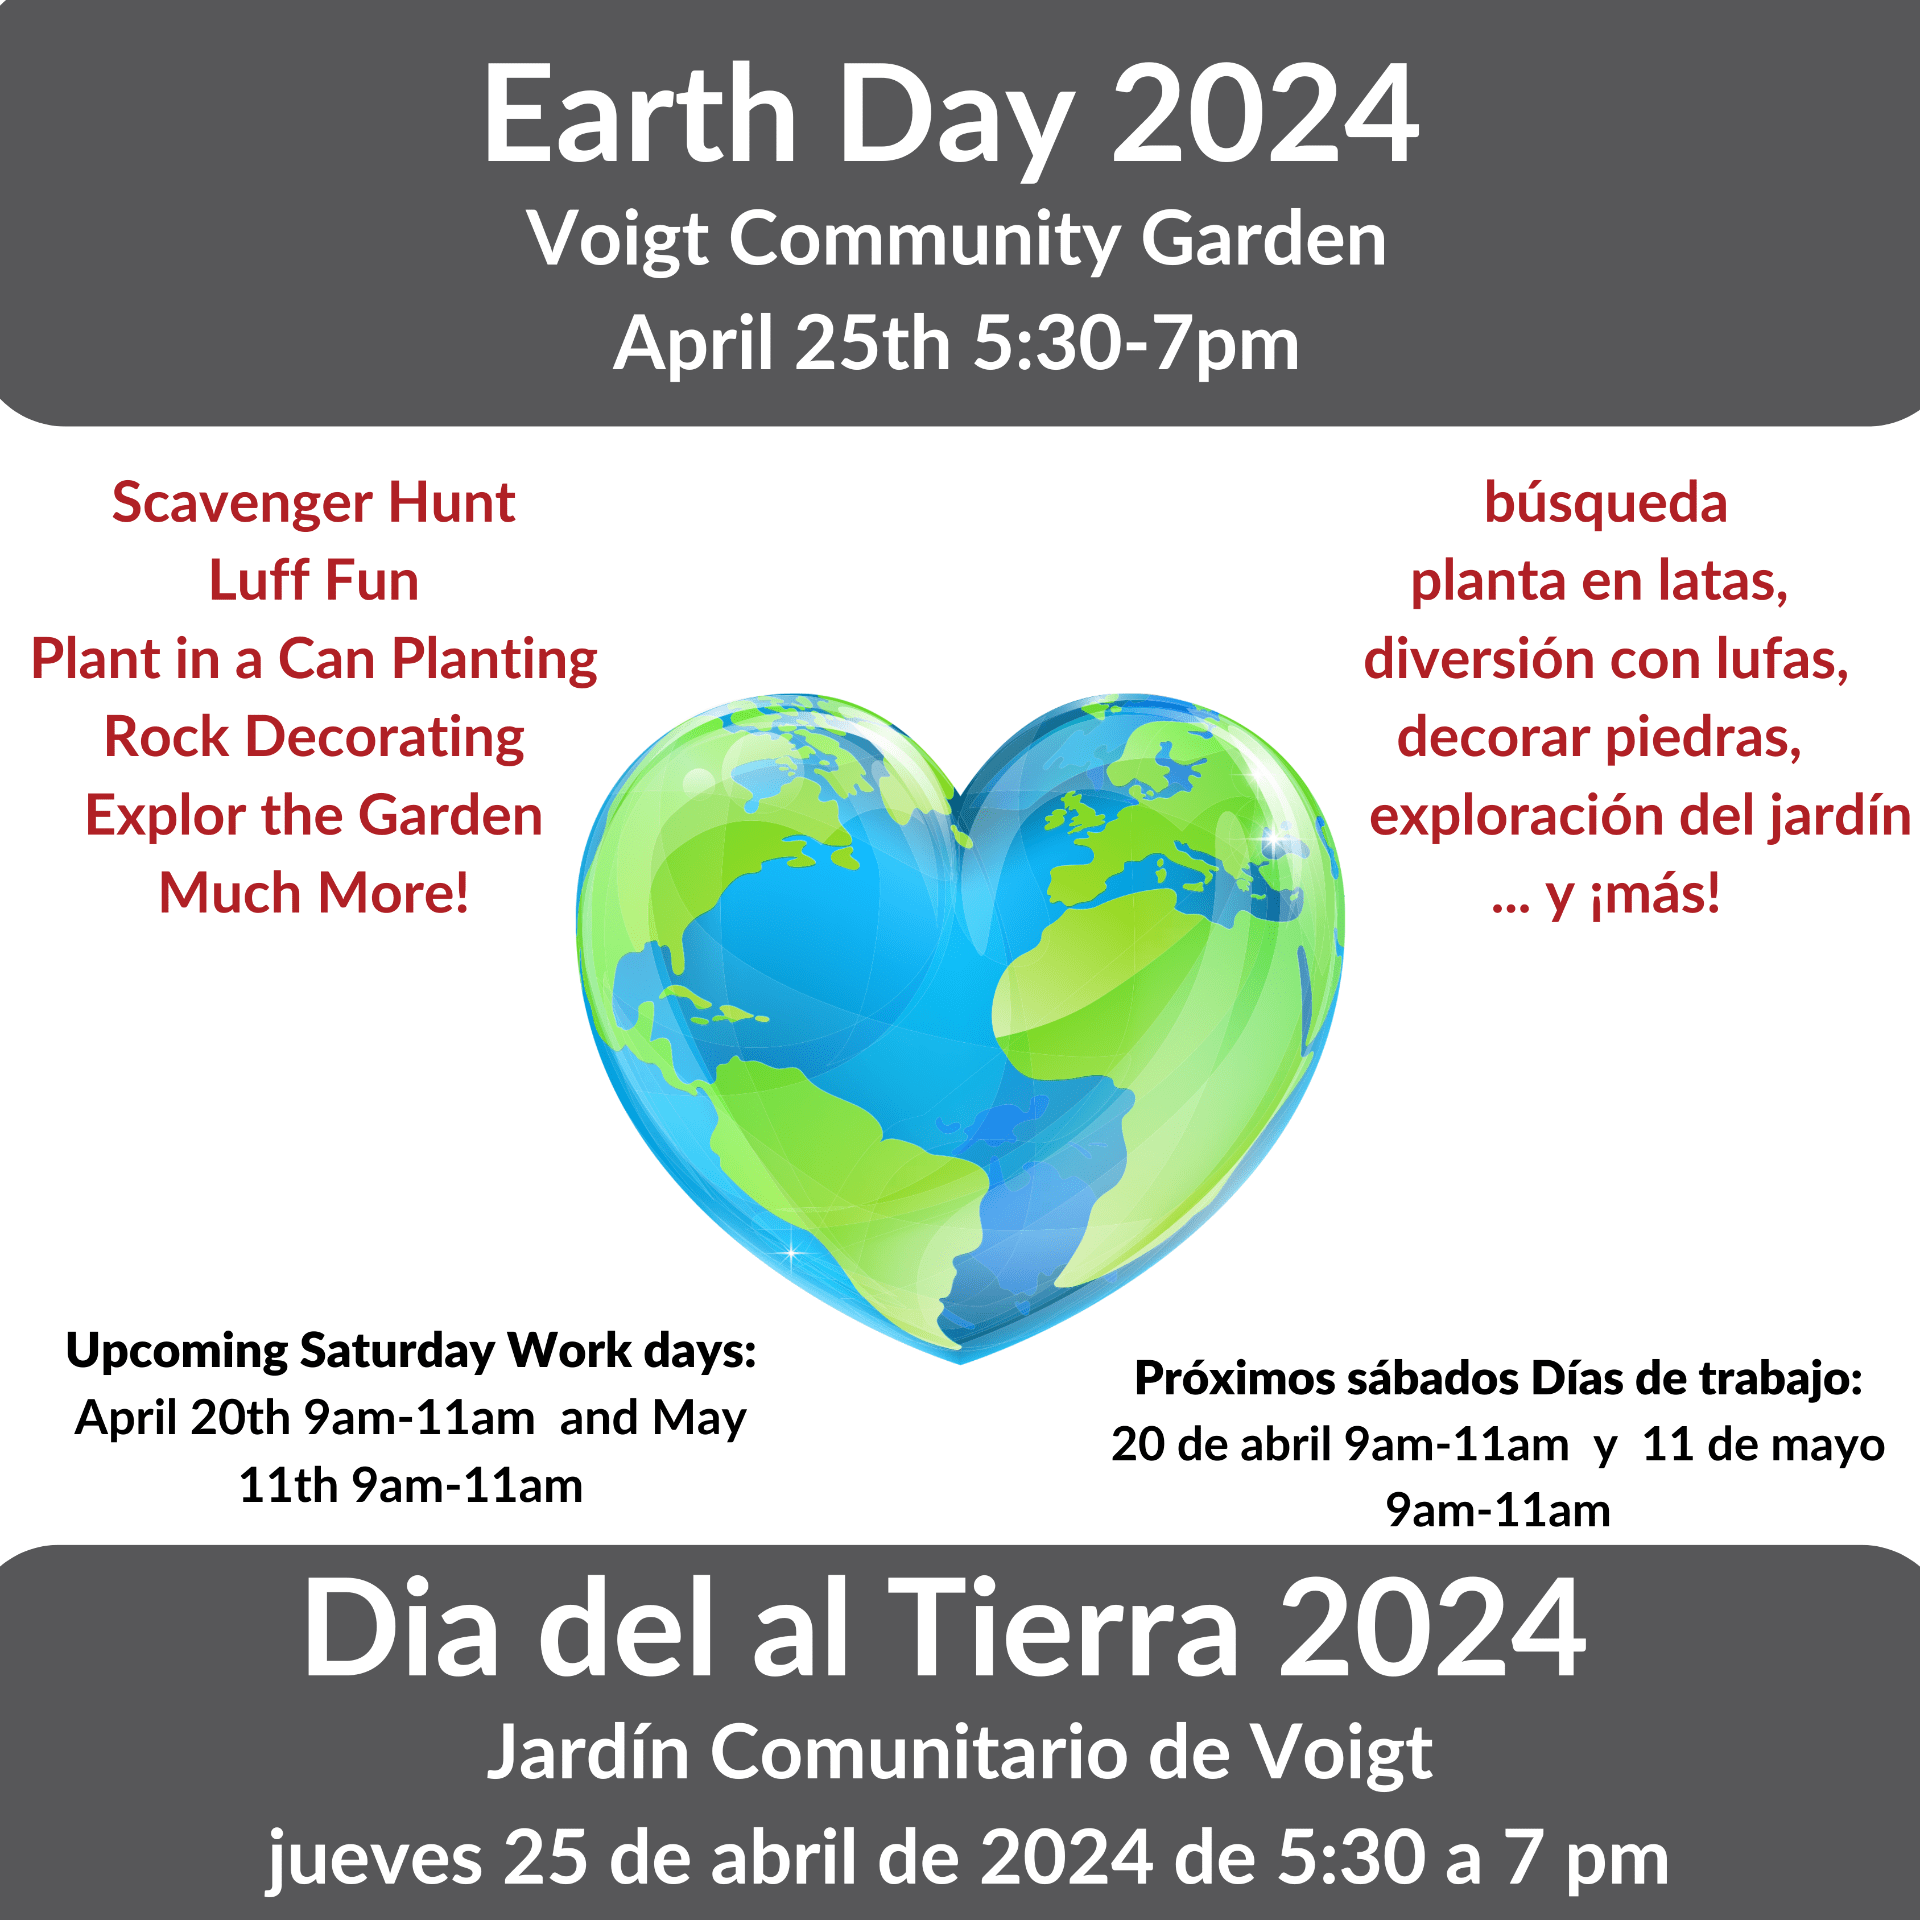 Clelbrate Earth Day in the Voigt Community Garde. Thursday April 25th from 5:30-7pm